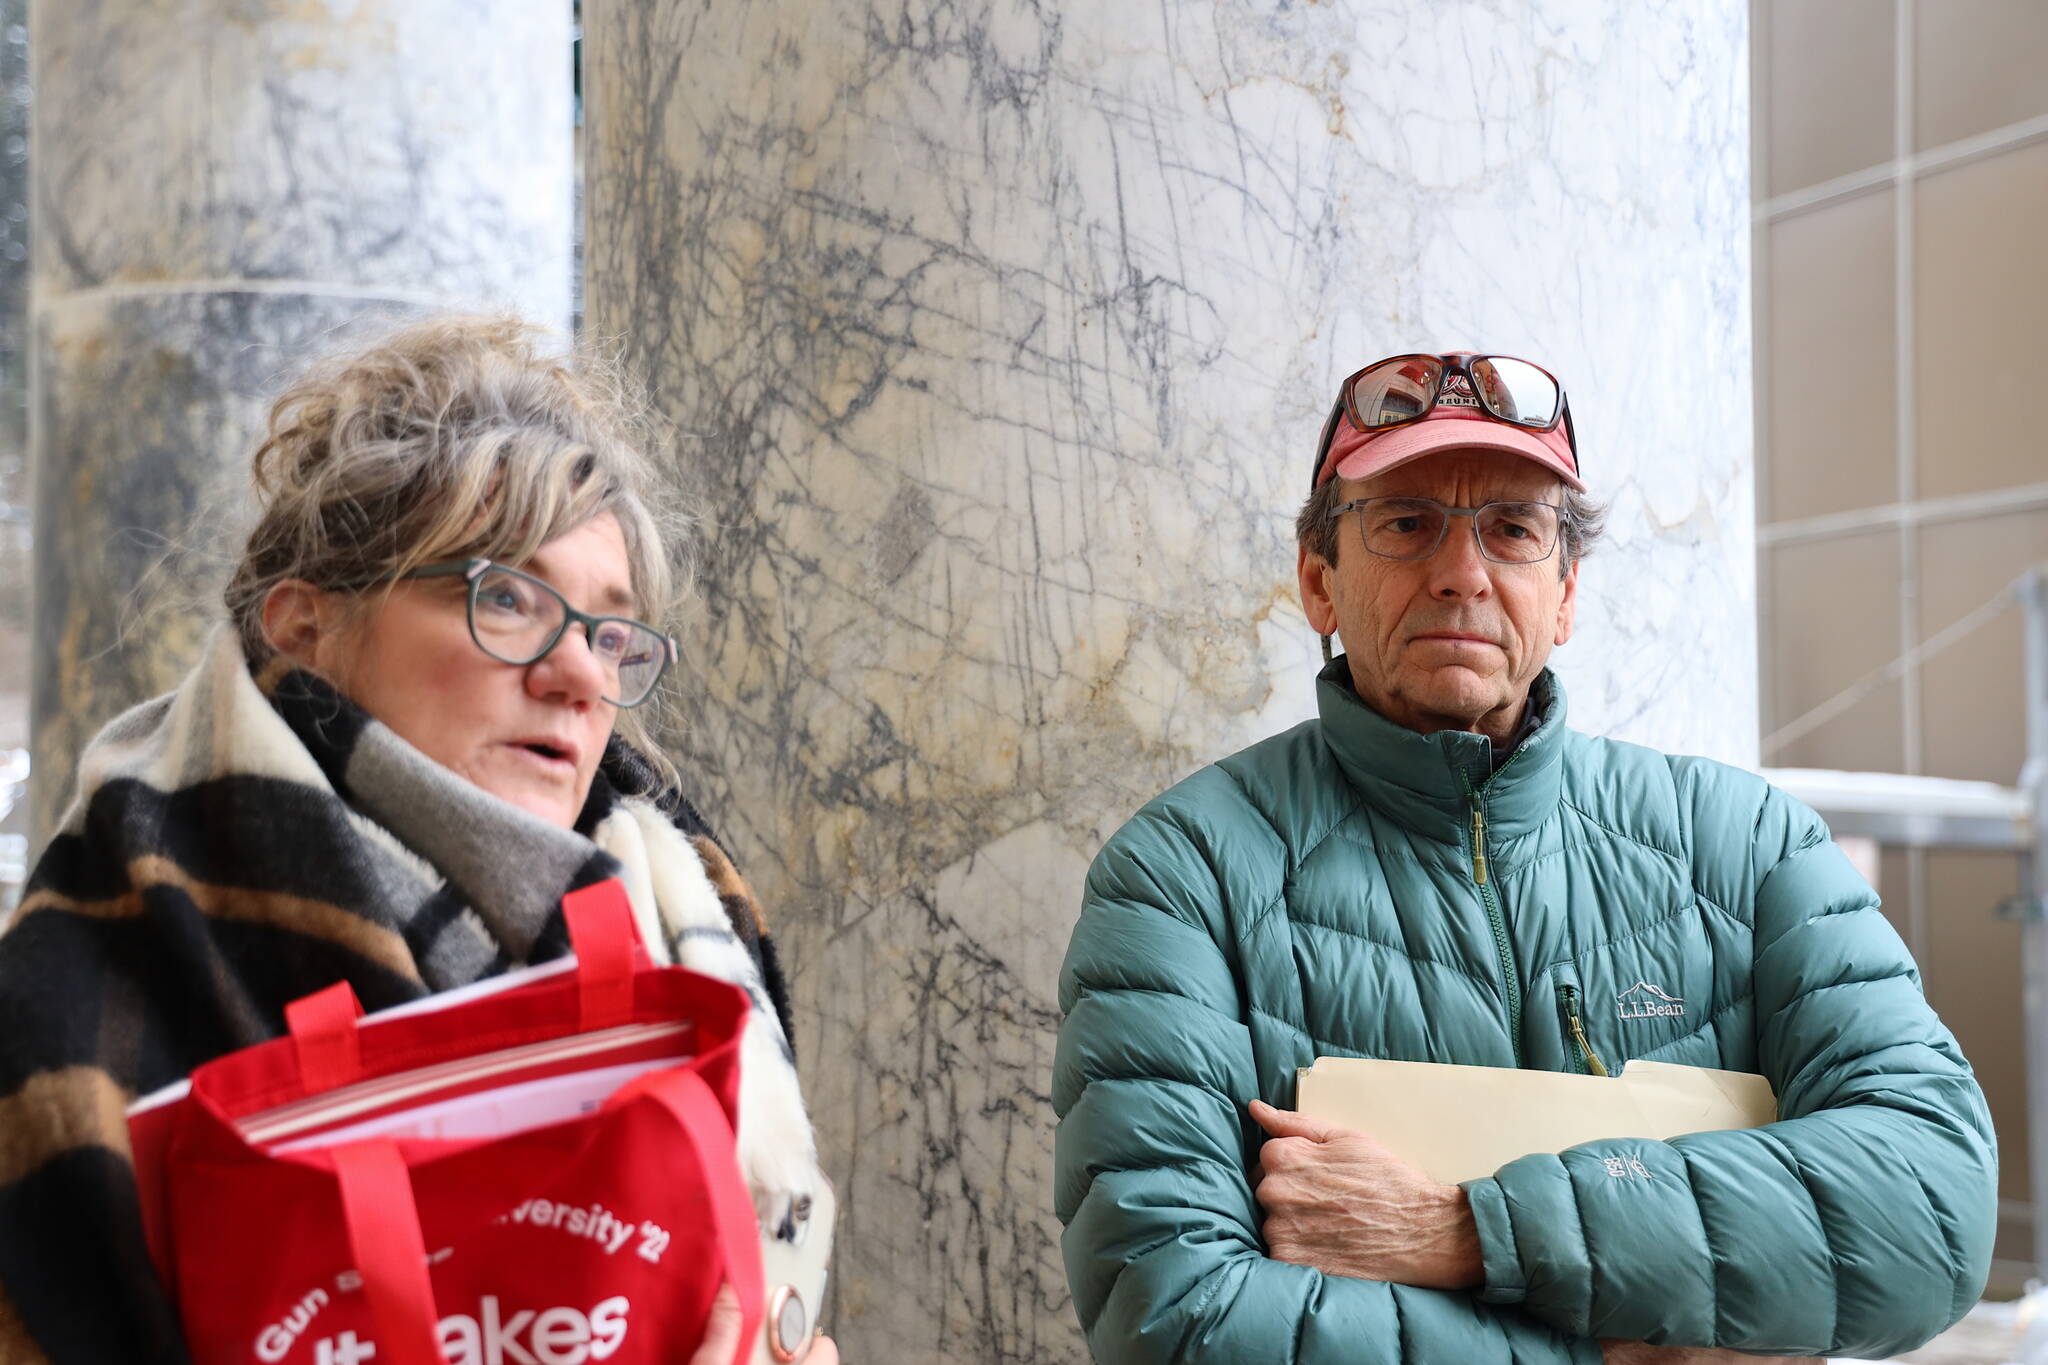 Clarise Larson / Juneau Empire 
Tamara Kruse and Frank Rue, volunteers with Moms Demand Action, discuss their meetings about proposed gun safety legislation with state lawmakers at the Alaska State Capitol on Tuesday.